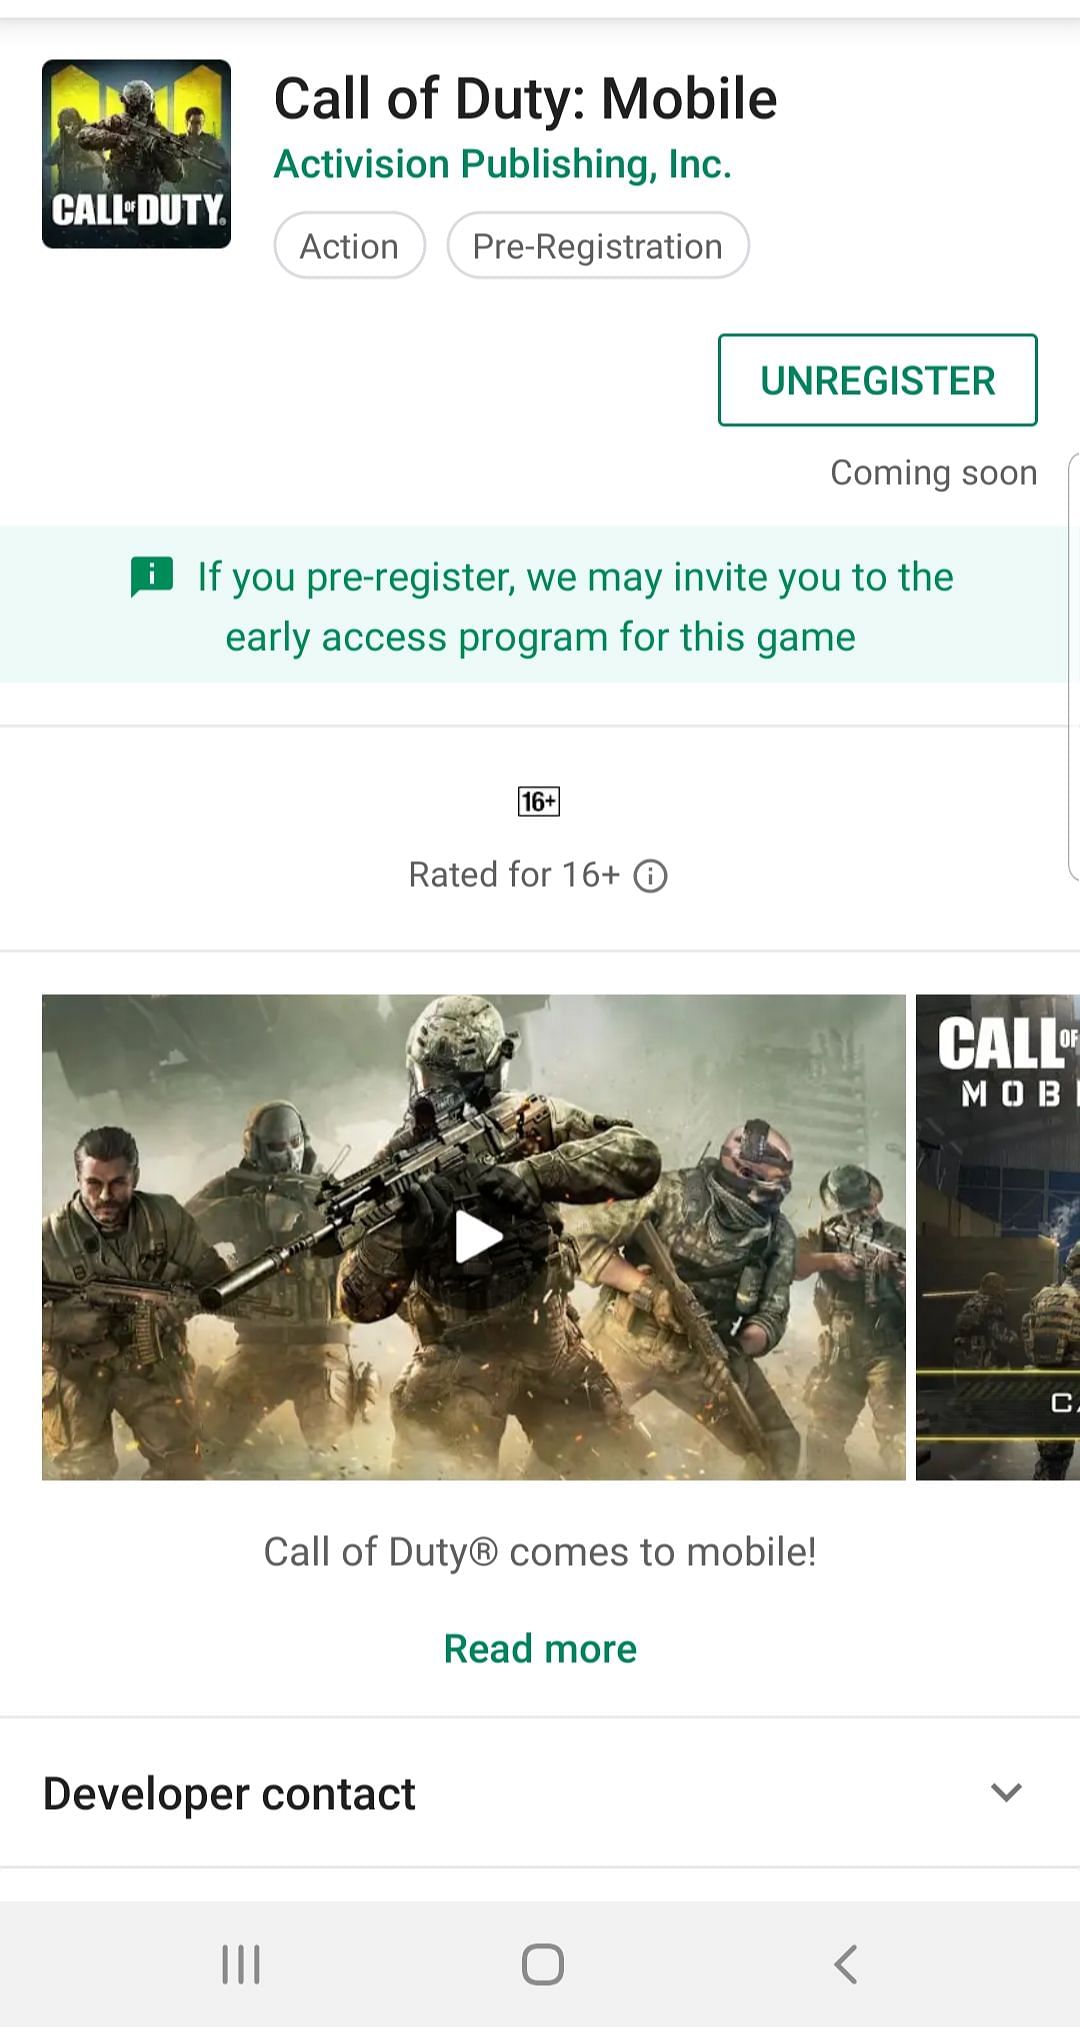 The beta version of Call of Duty: Mobile will be available around July 2019.